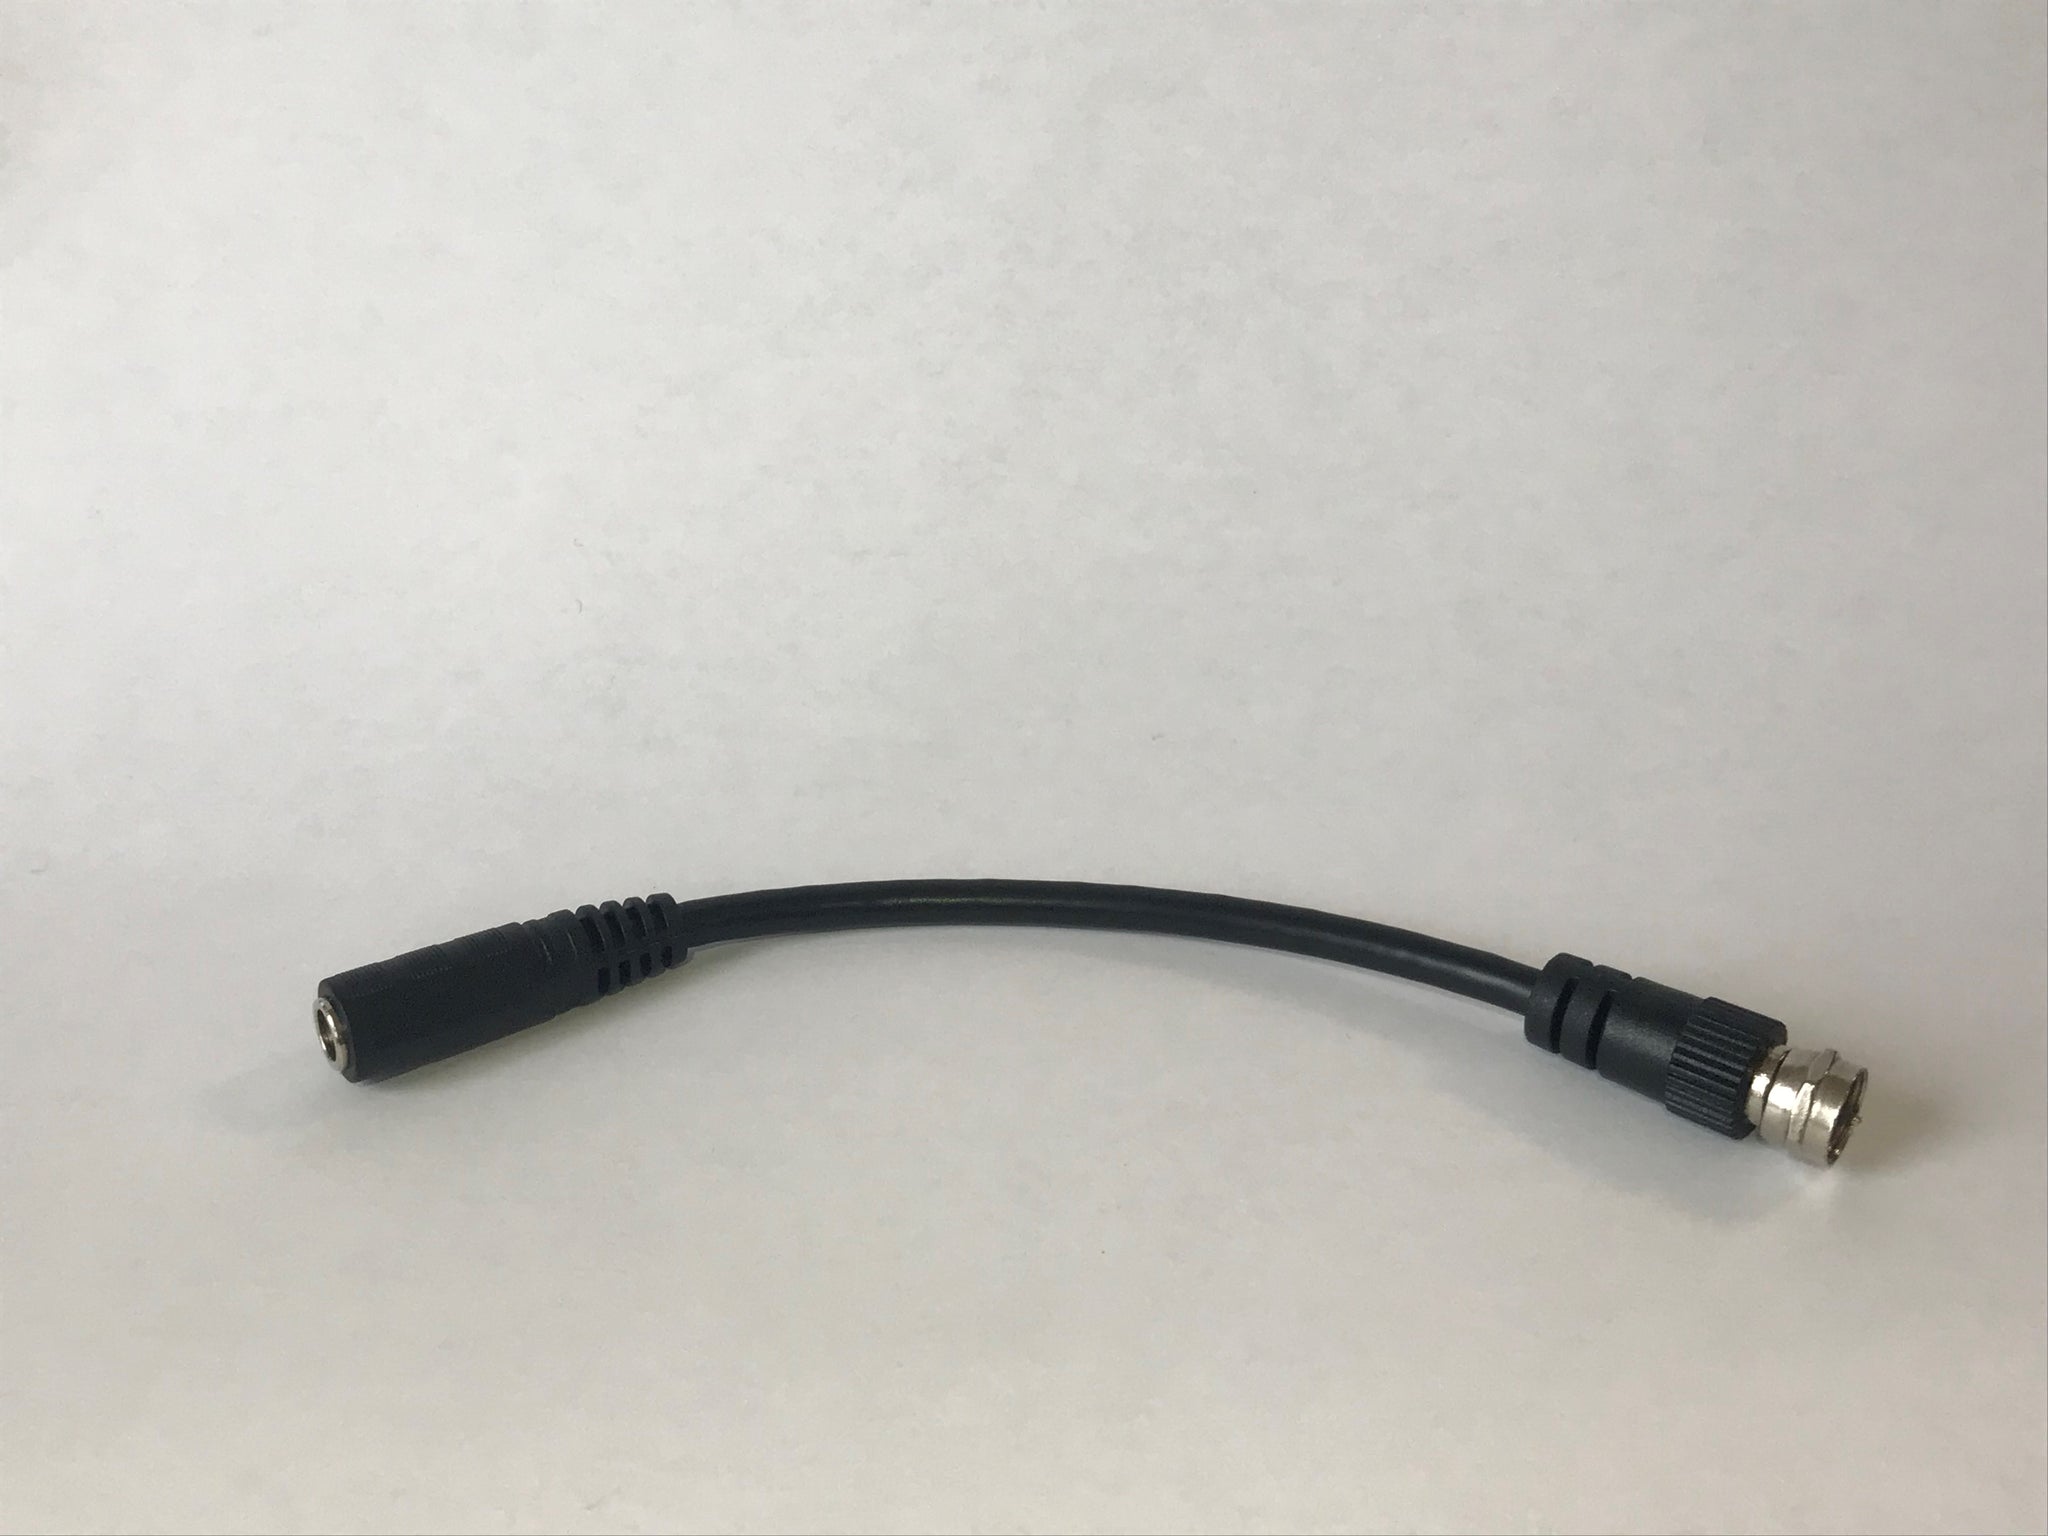 Jack to f type adapter